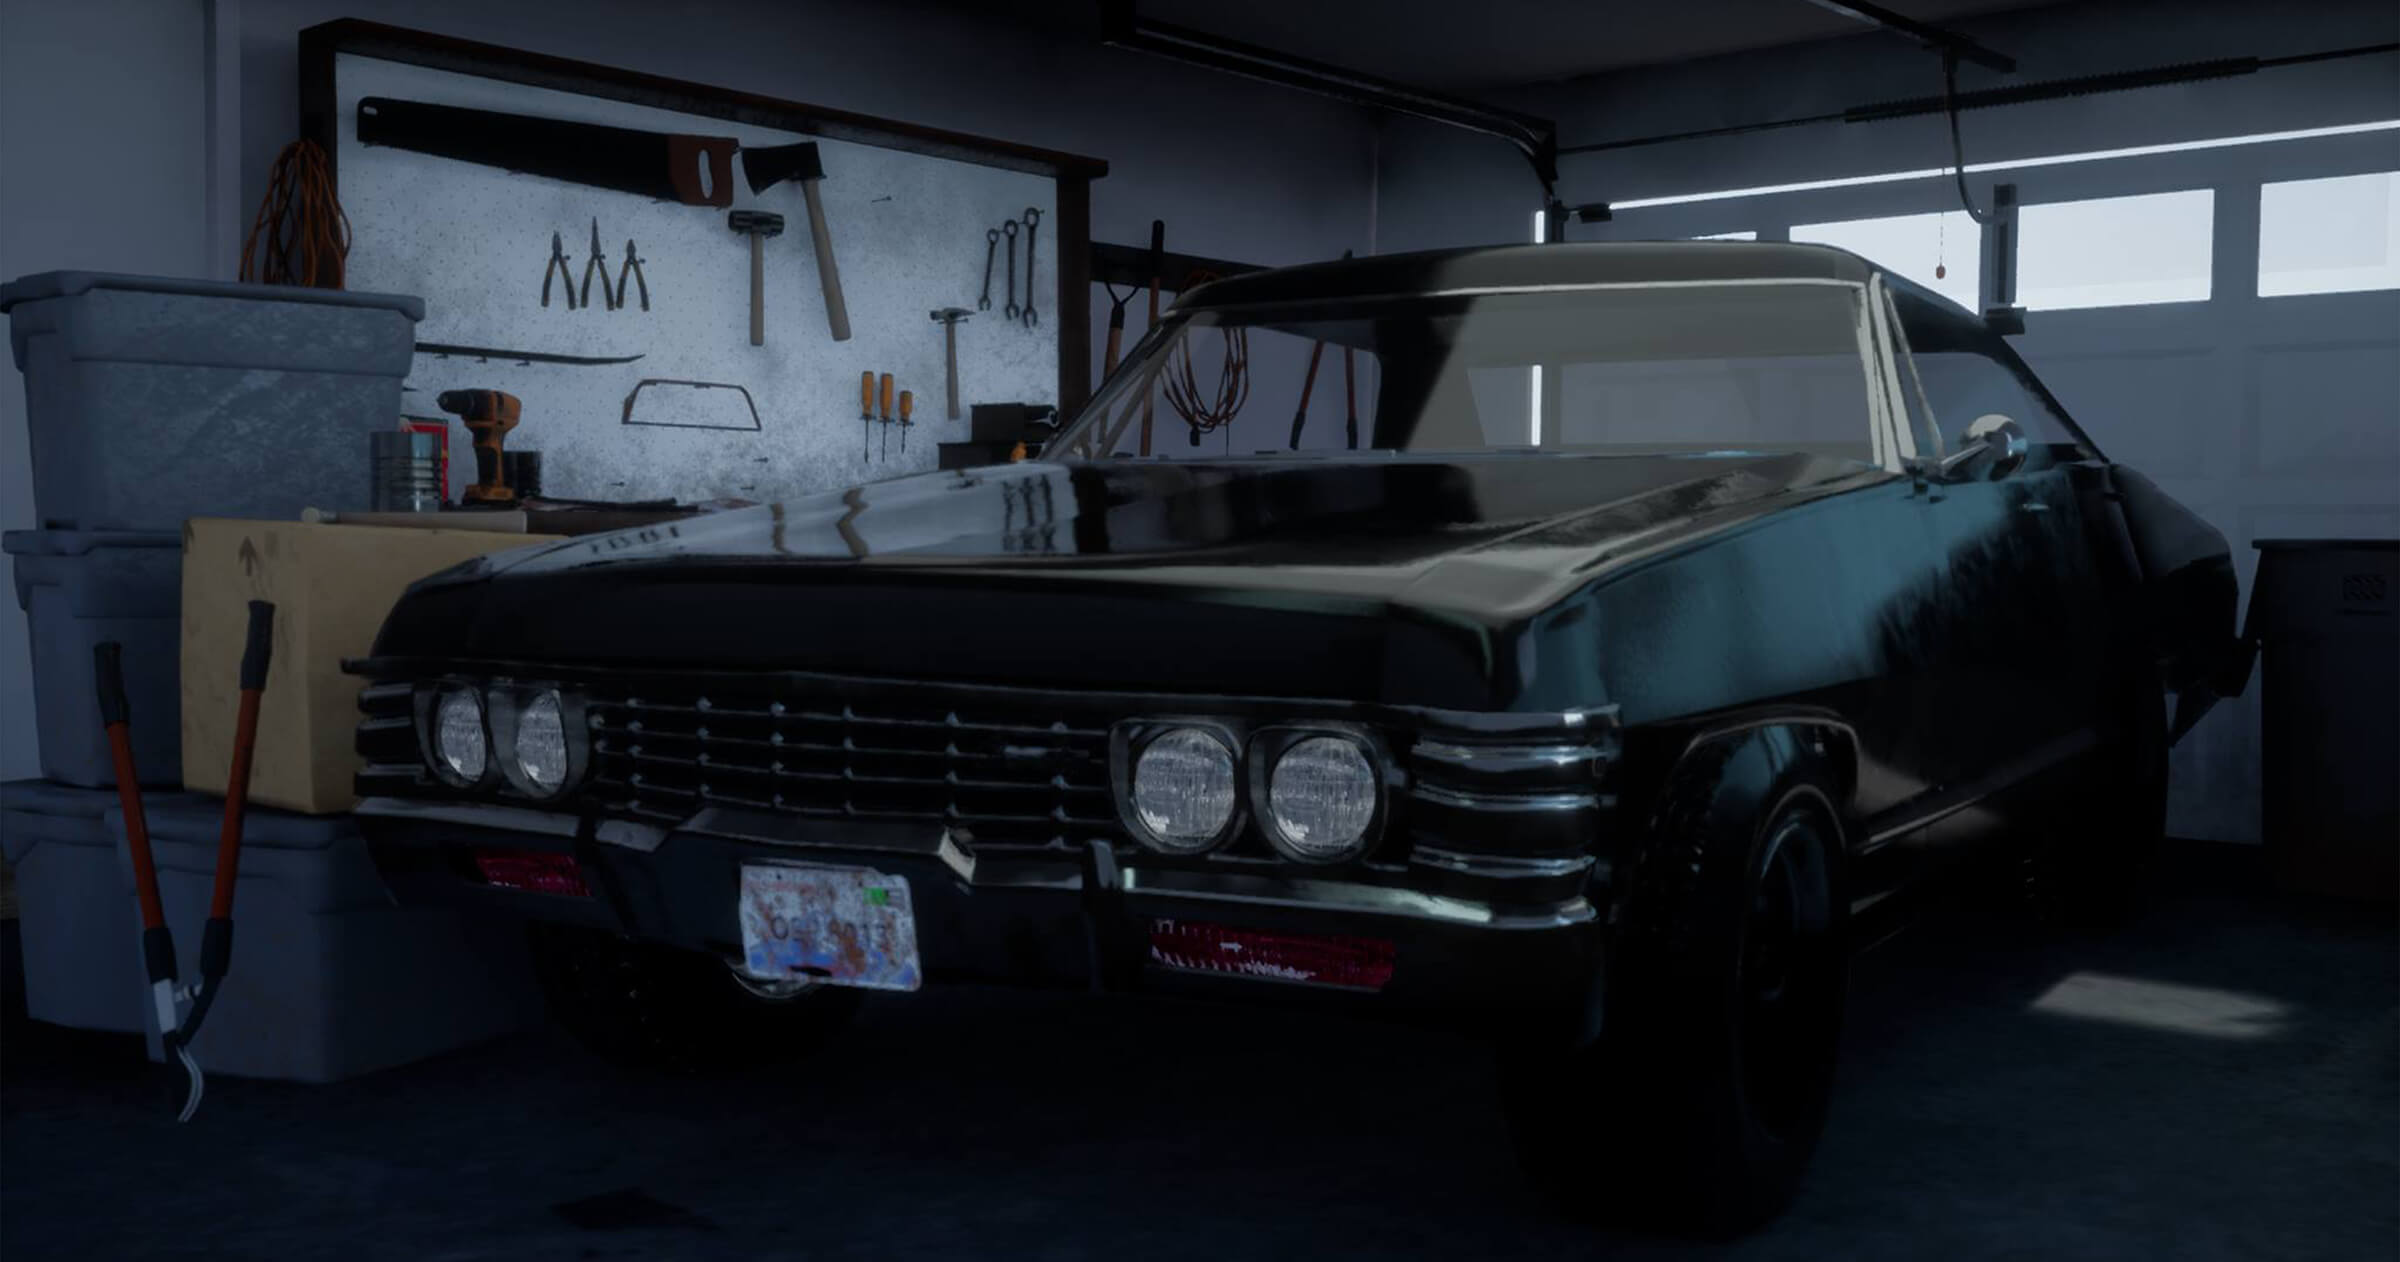 A muscle car in a closed home garage